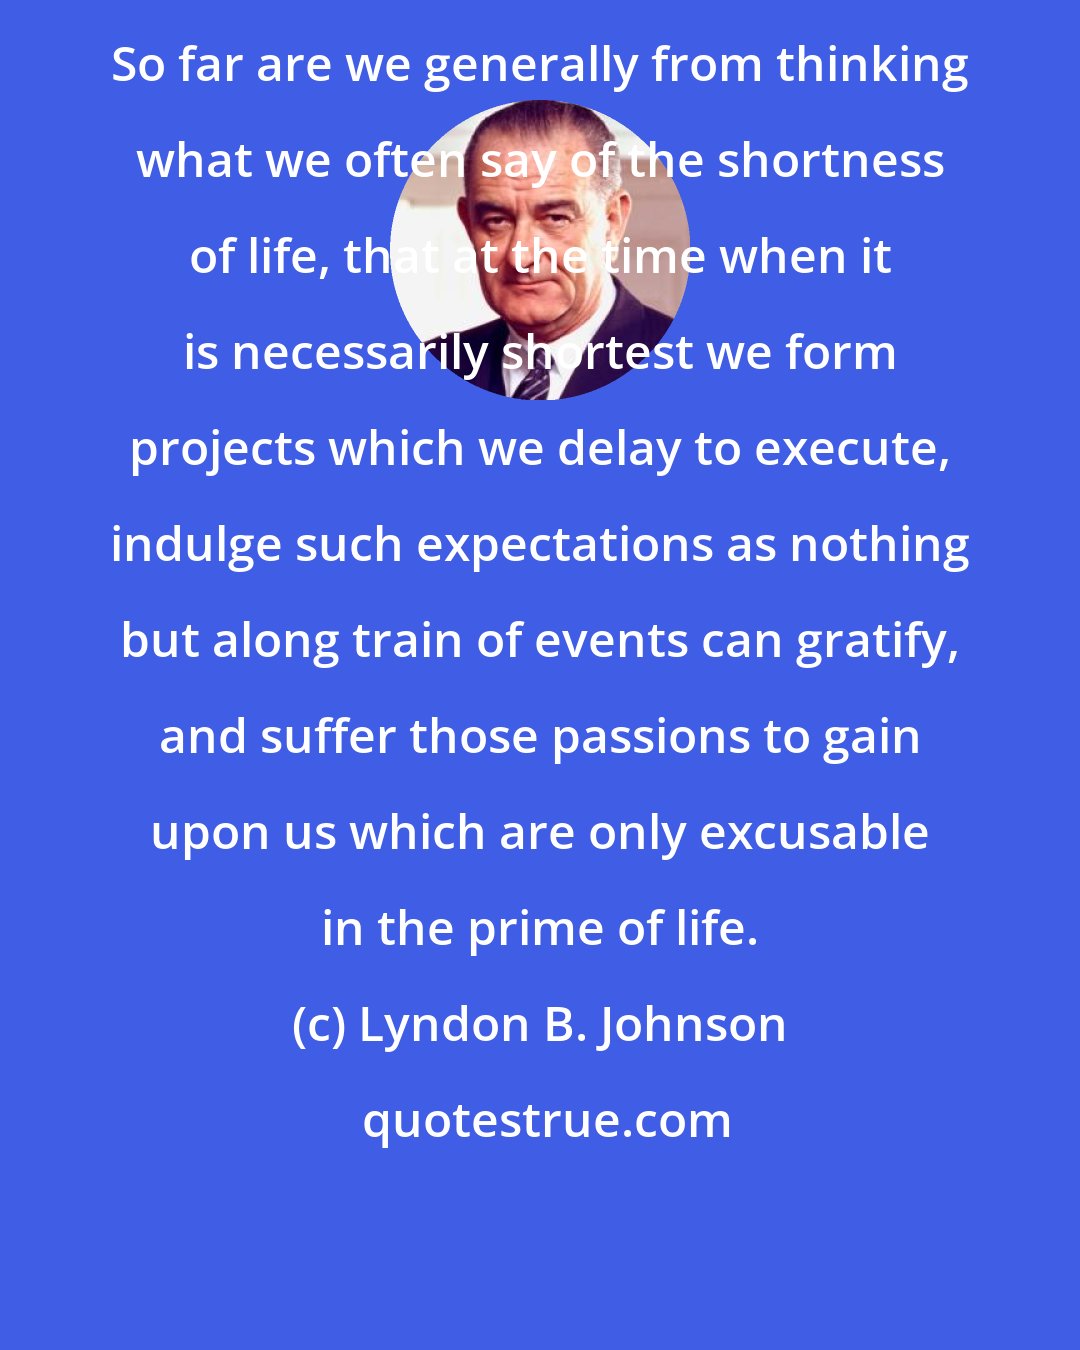 Lyndon B. Johnson: So far are we generally from thinking what we often say of the shortness of life, that at the time when it is necessarily shortest we form projects which we delay to execute, indulge such expectations as nothing but along train of events can gratify, and suffer those passions to gain upon us which are only excusable in the prime of life.